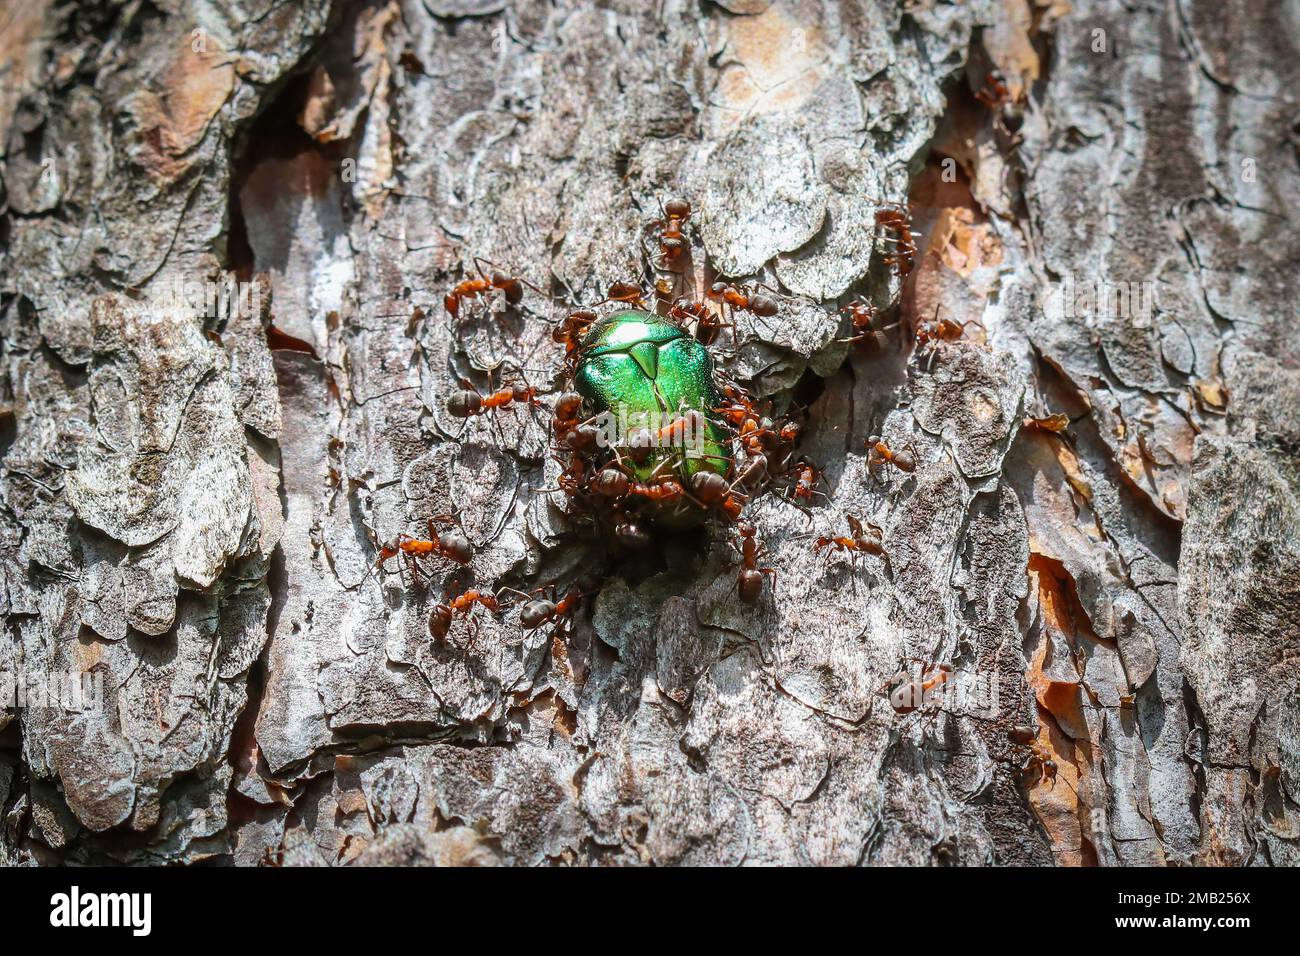 Fire ants attack sapphire flower beetle on pine tree trunk bark Stock Photo